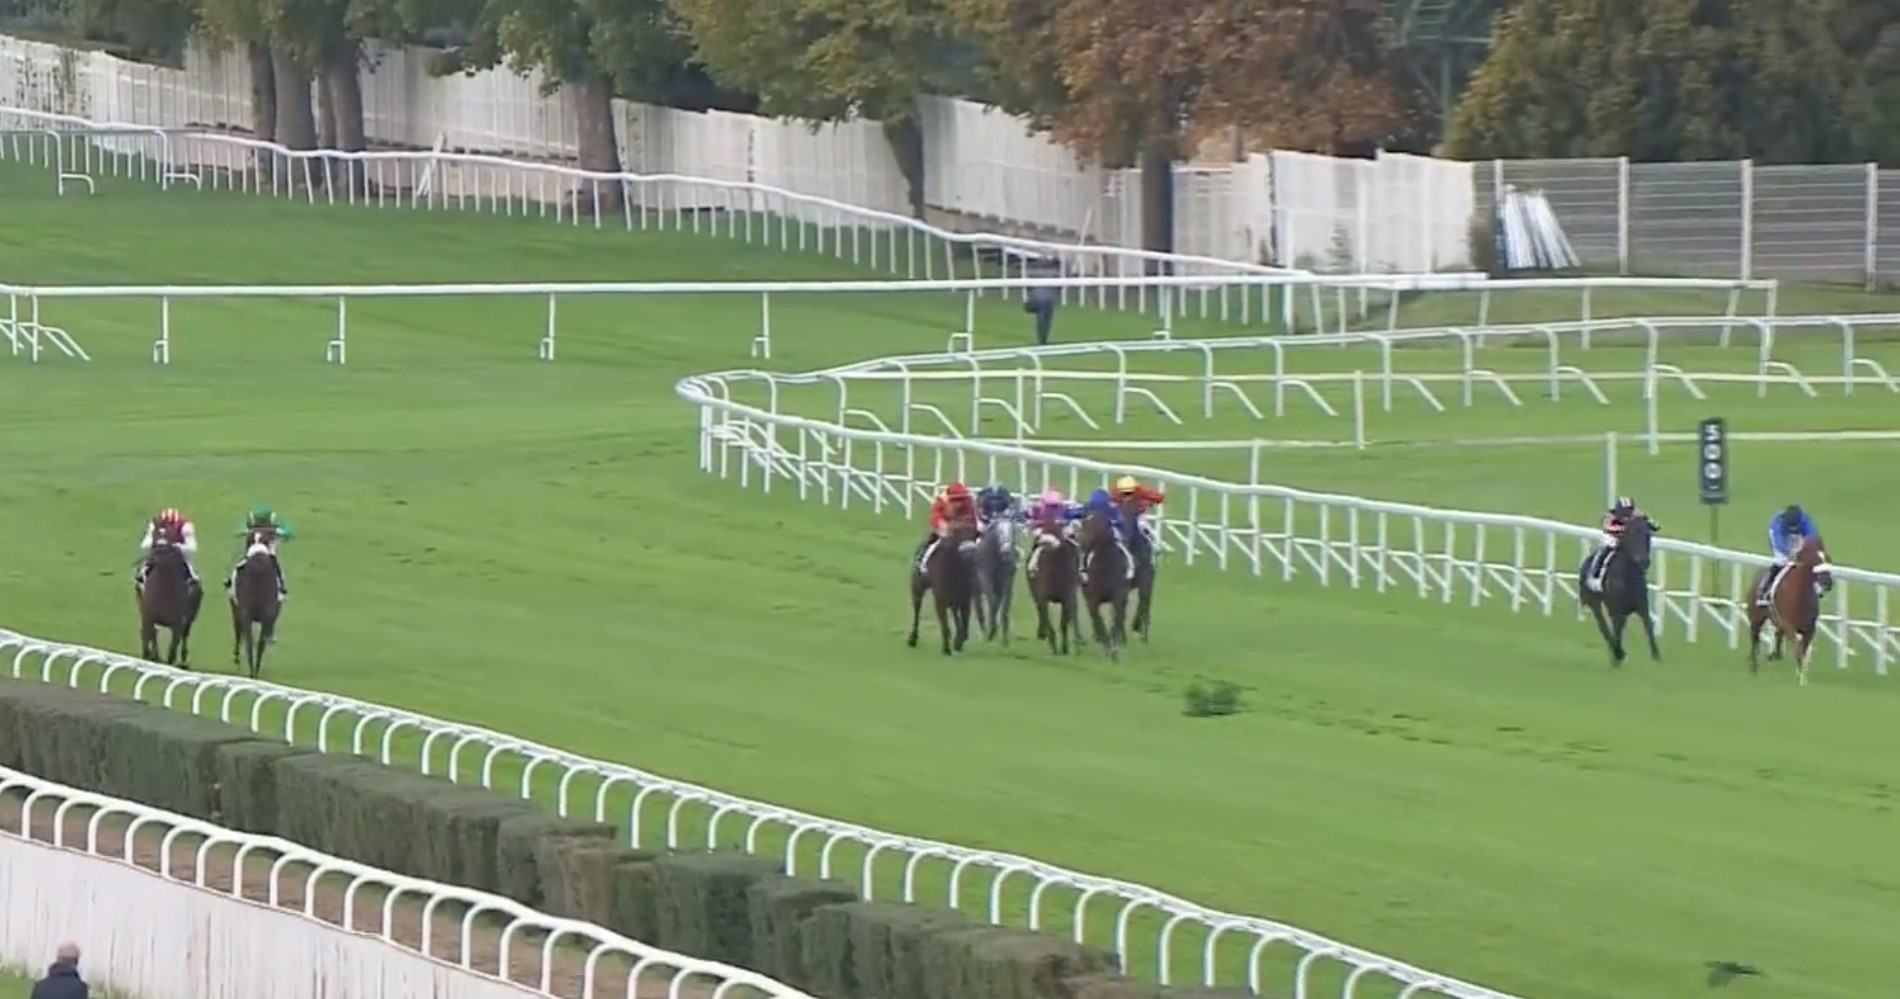 , Jockey ‘stitches up’ rivals with amazing ride even losing punters have to stop and applaud